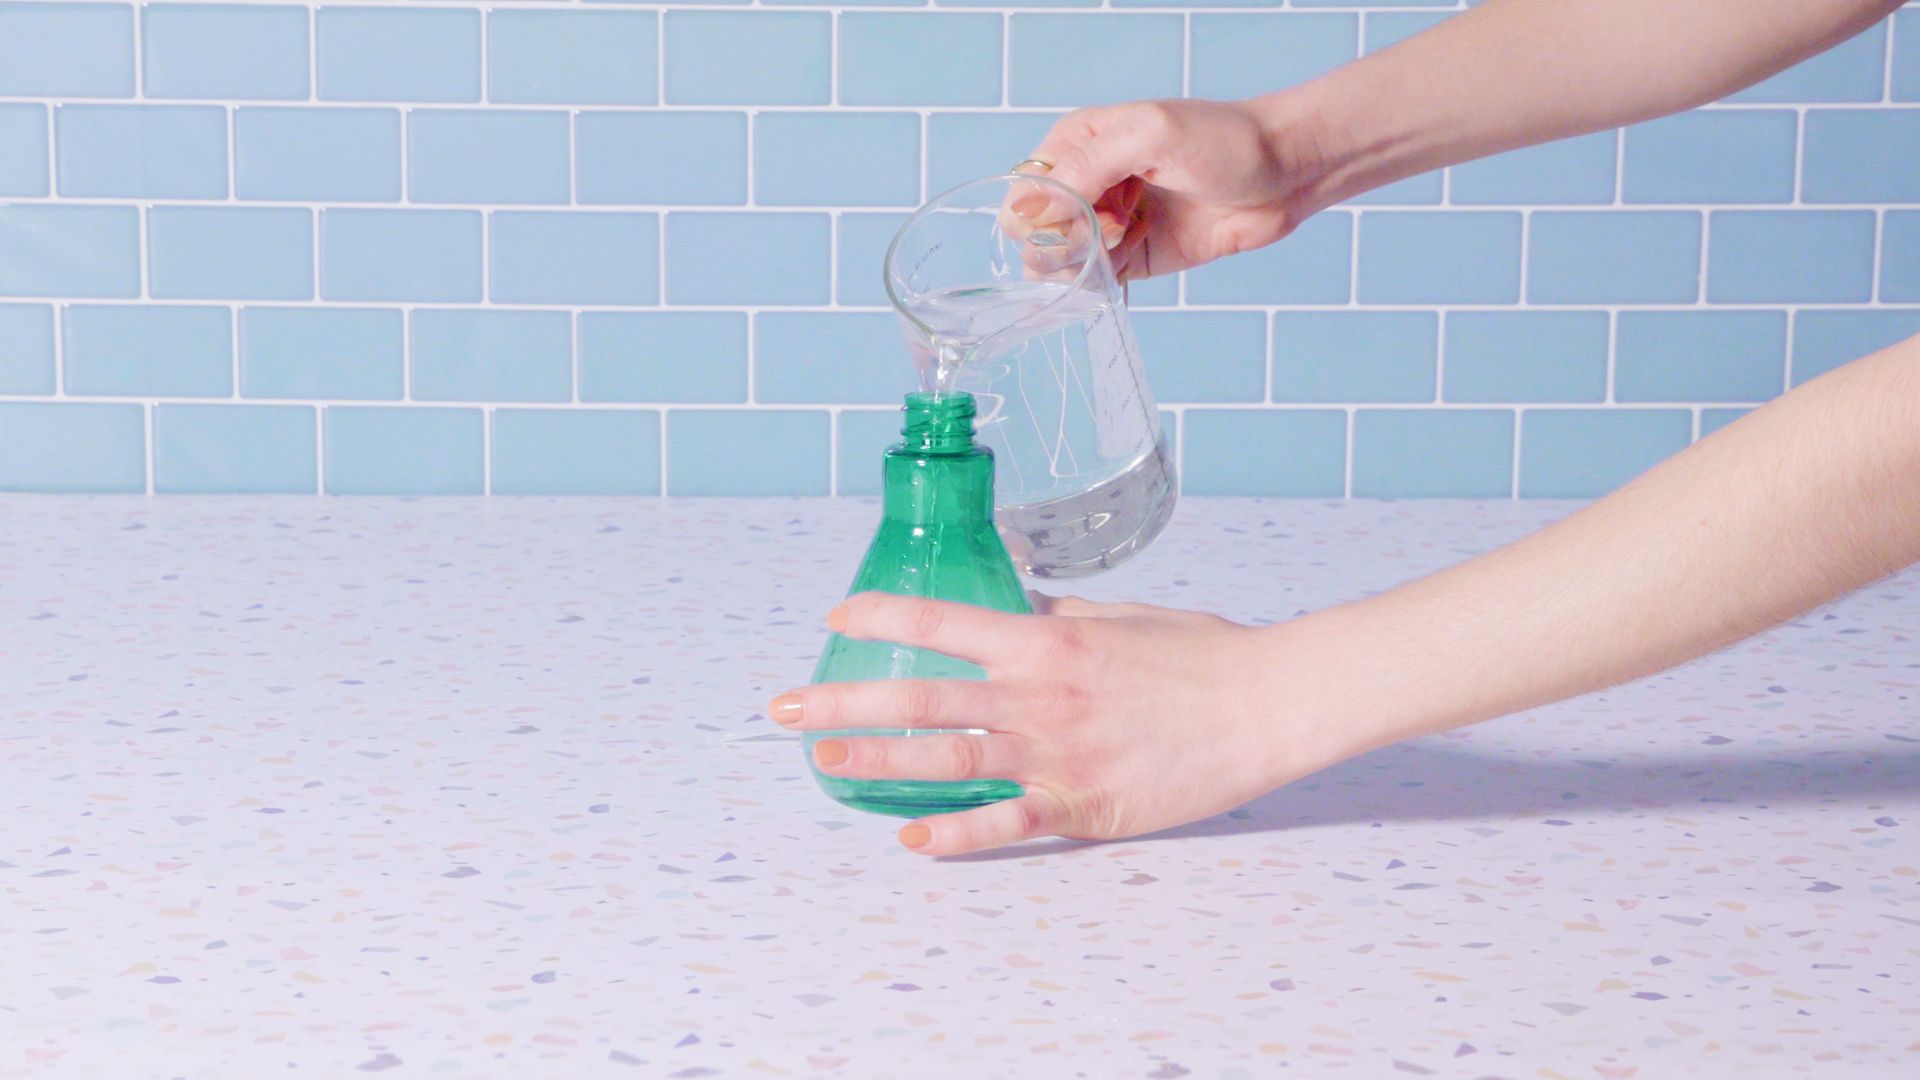 How to Clean Shower Glass - Handmade Weekly